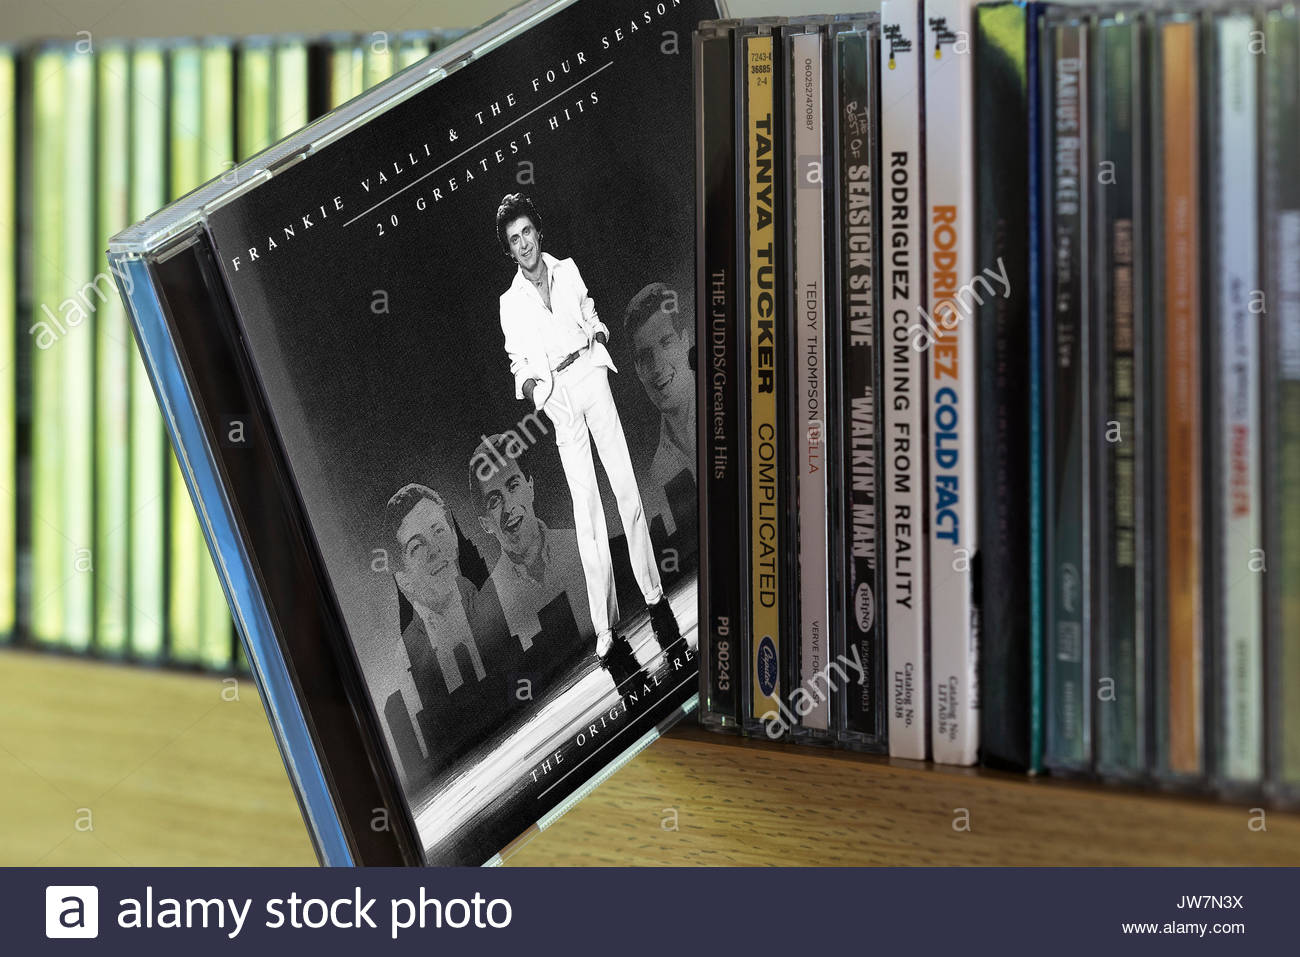 Frankie Valli & The Four Seasons High Resolution Stock Photography and ...